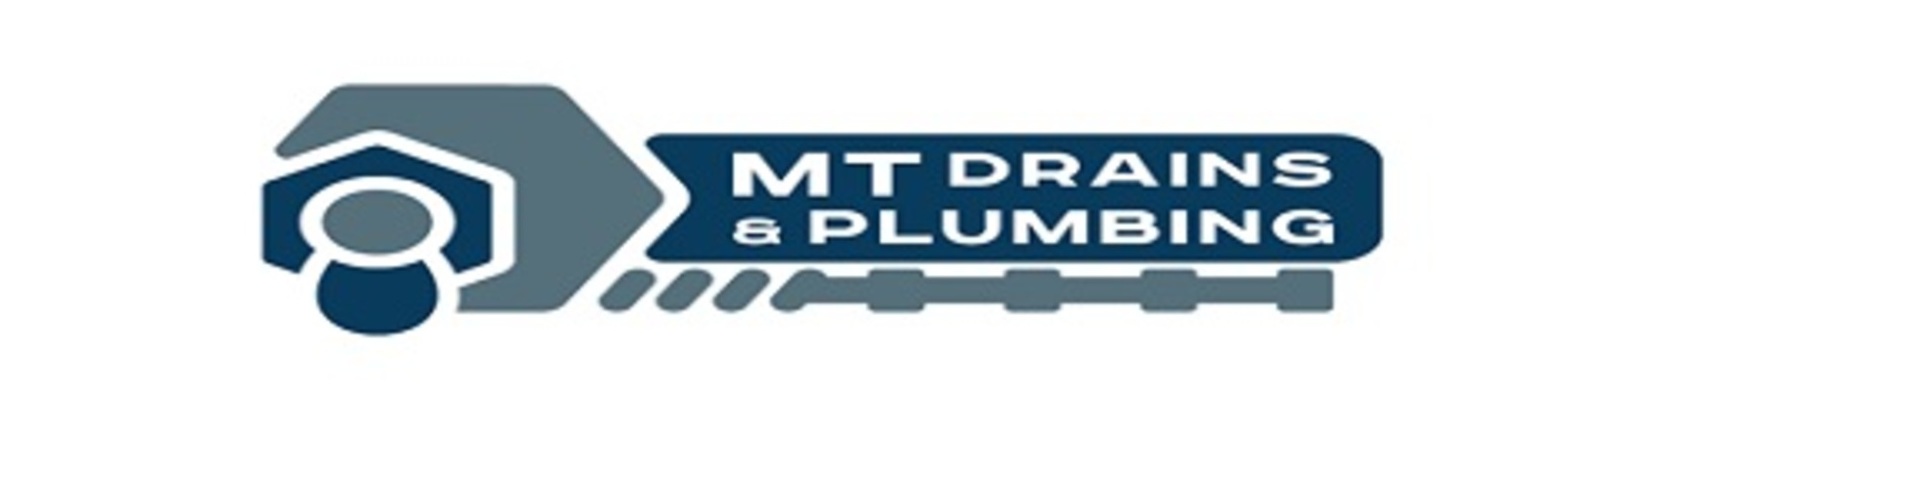 MT Drains And Plumbing Company Vaughan